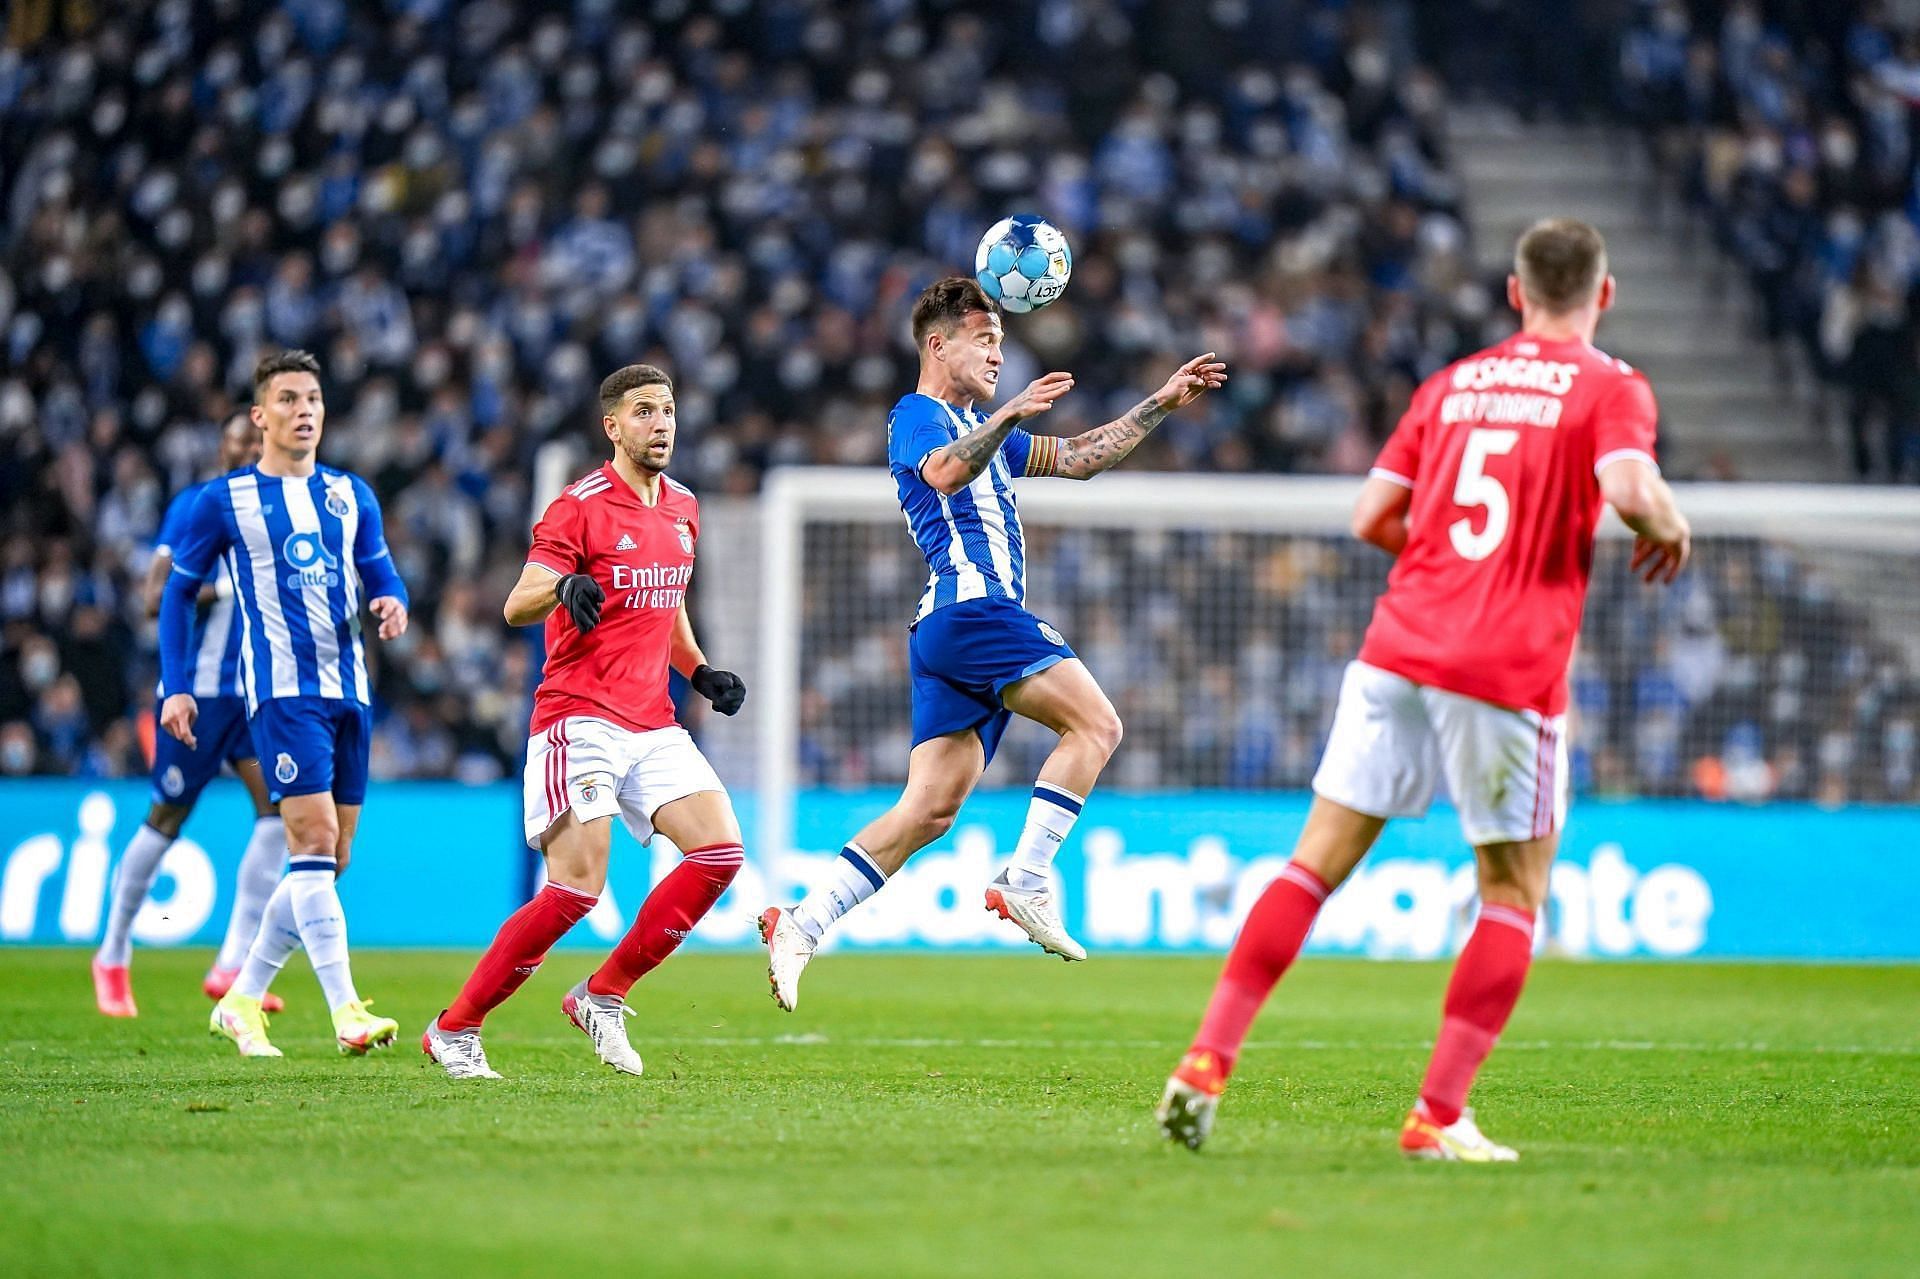 Porto can capture the league title with a win against Benfica on Saturday